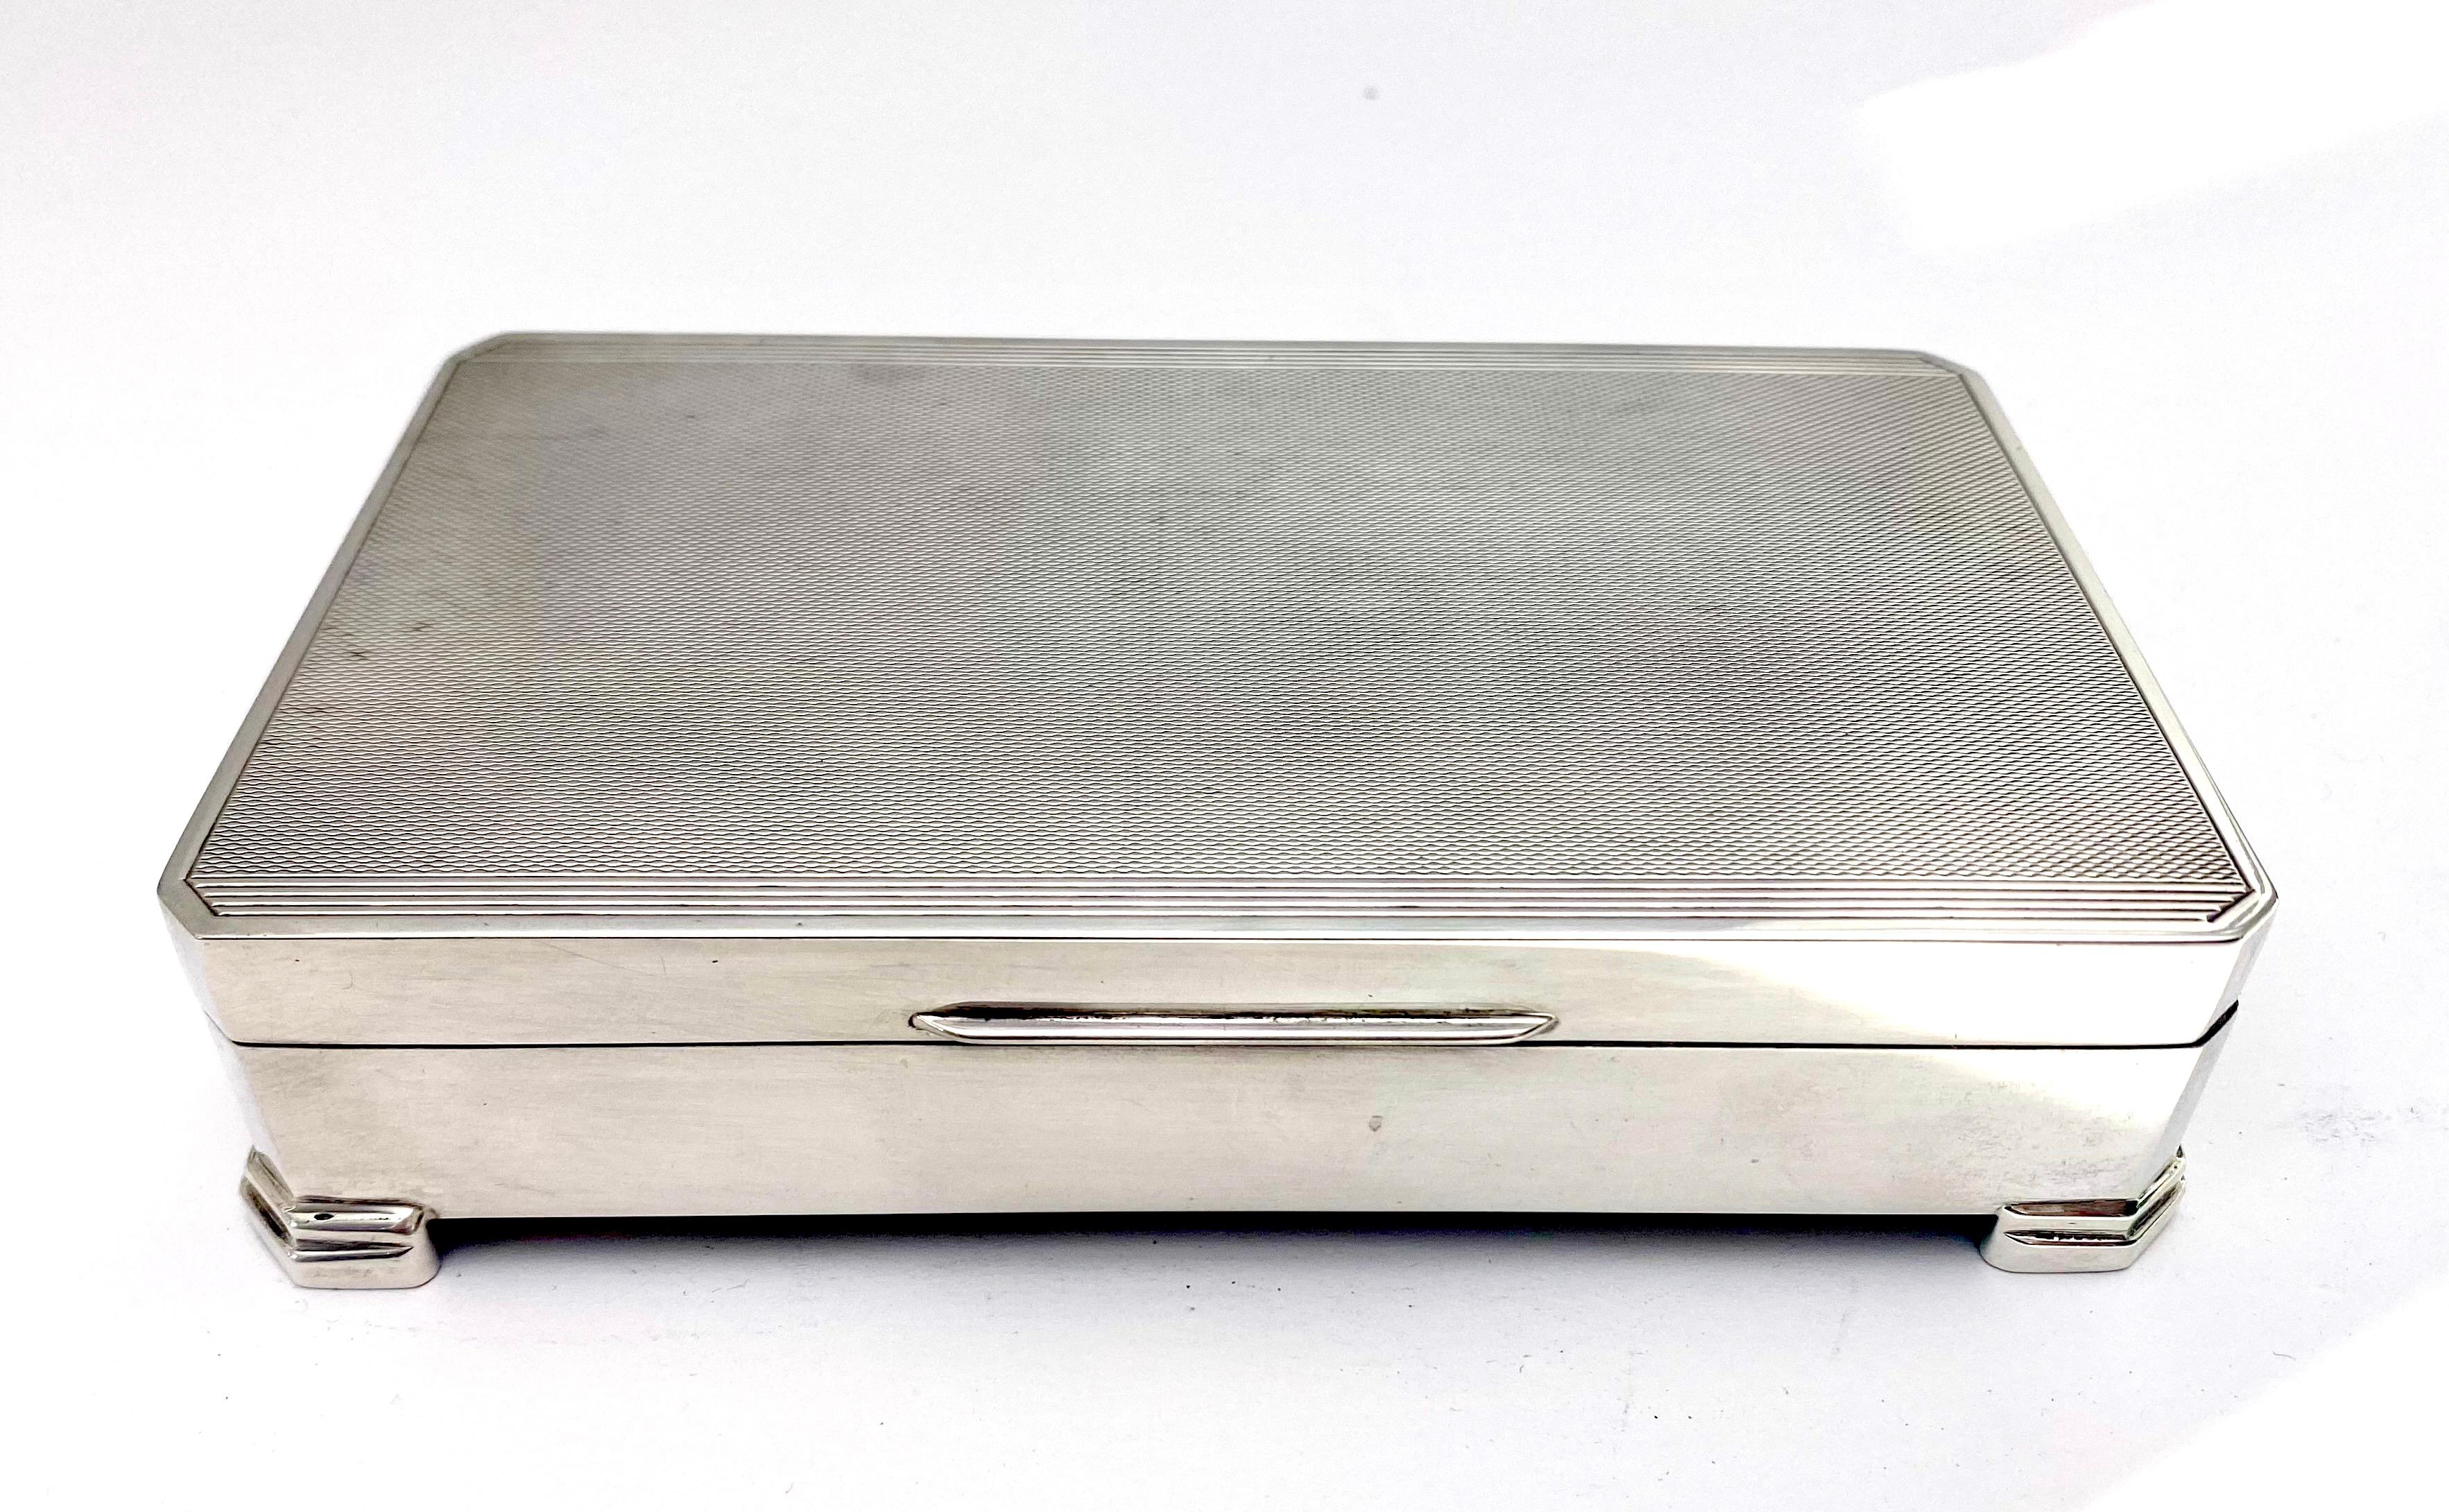 An exceptional, fine and impressive vintage English sterling silver cigarette or jewelry box with embellished engine turned decoration.
This exceptional vintage Elizabeth II silver box has a plain rectangular form and is fitted with the original